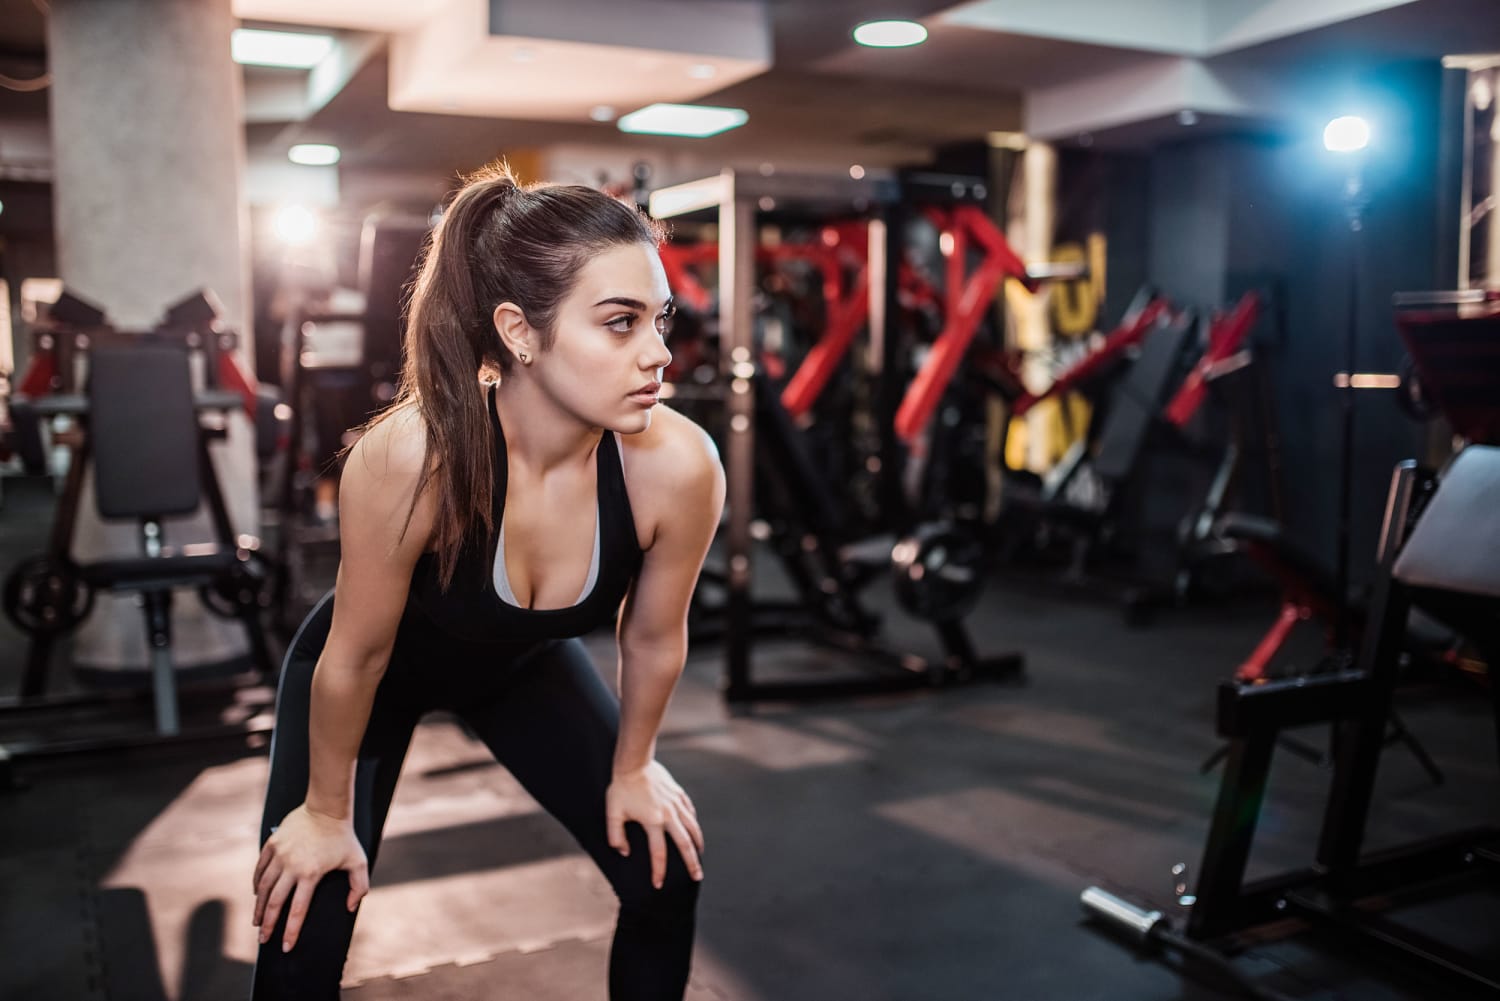 Fitness Fashion Trends to Boost Your Confidence at the Gym